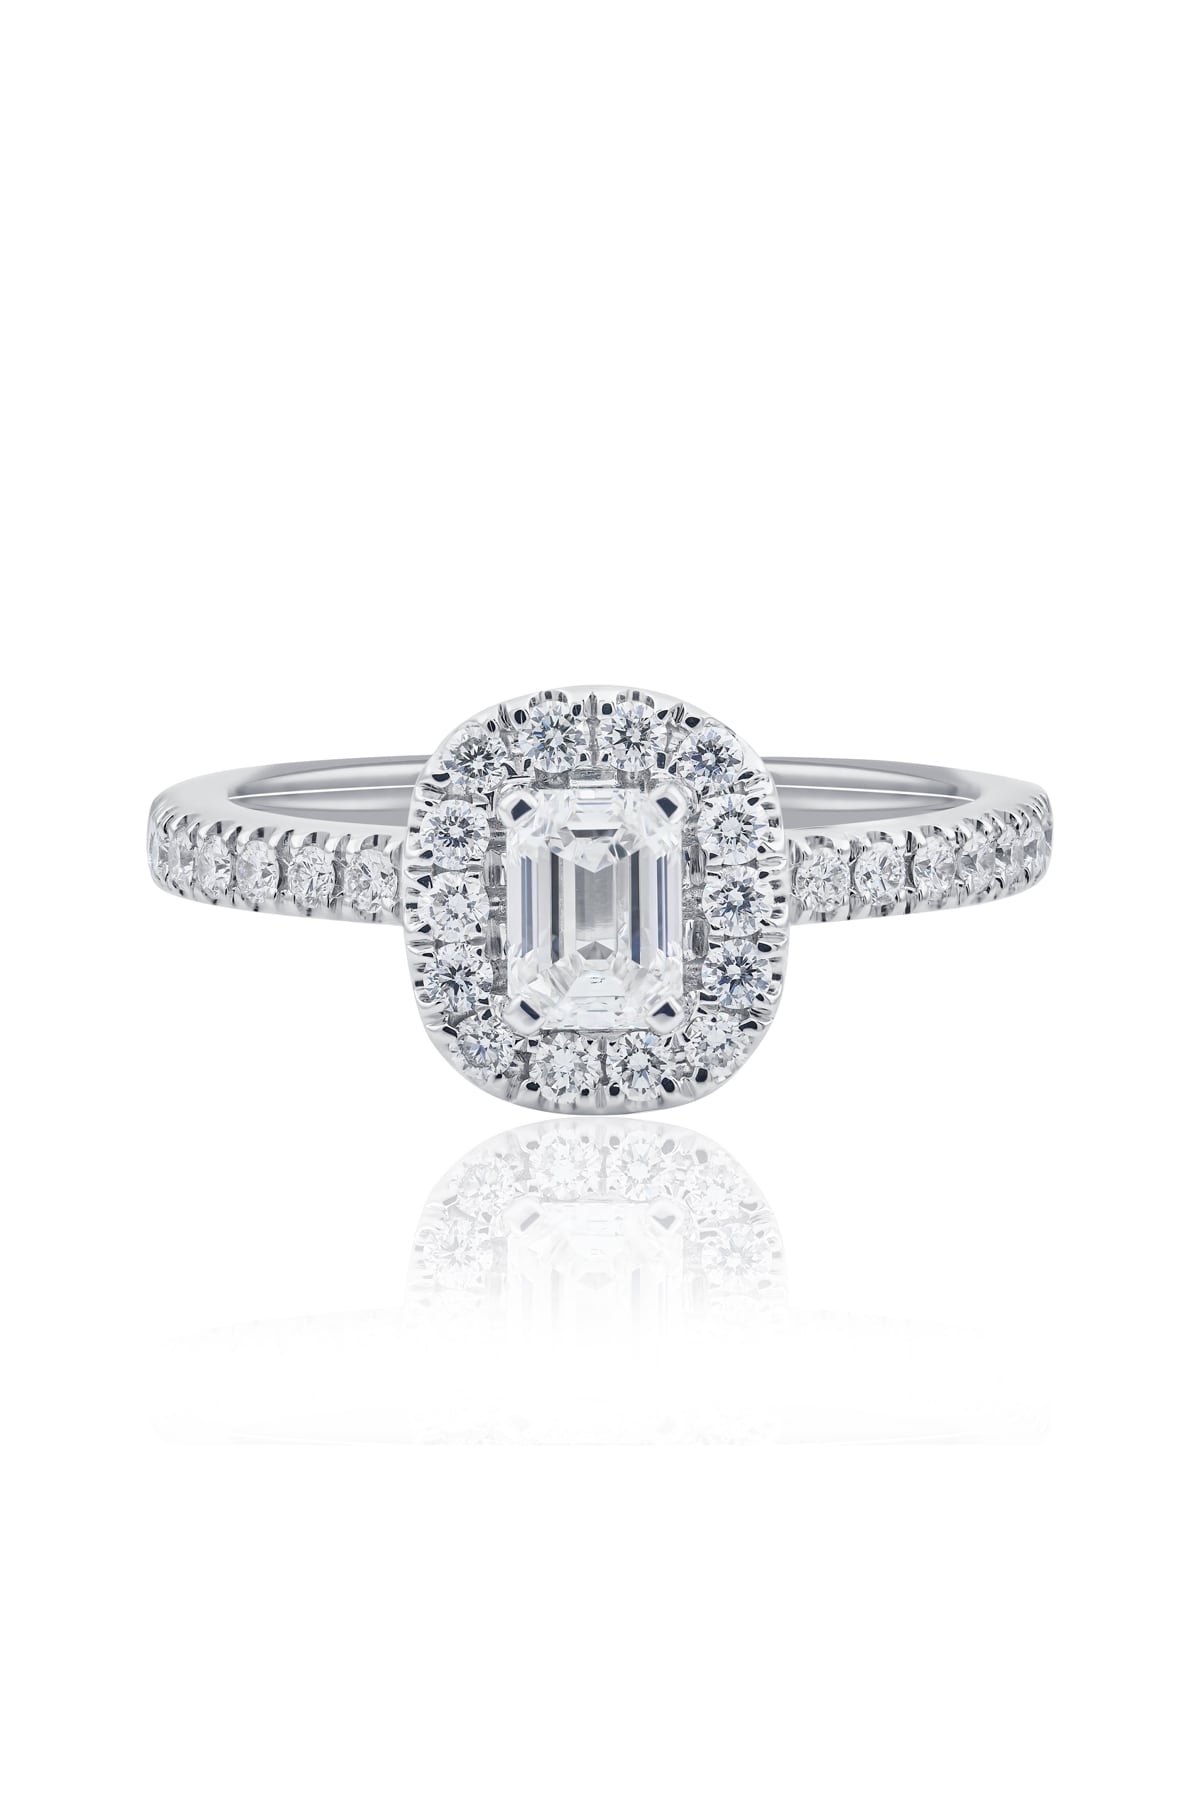 50 Point Emerald Cut Diamond Halo Ring from LeGassick.